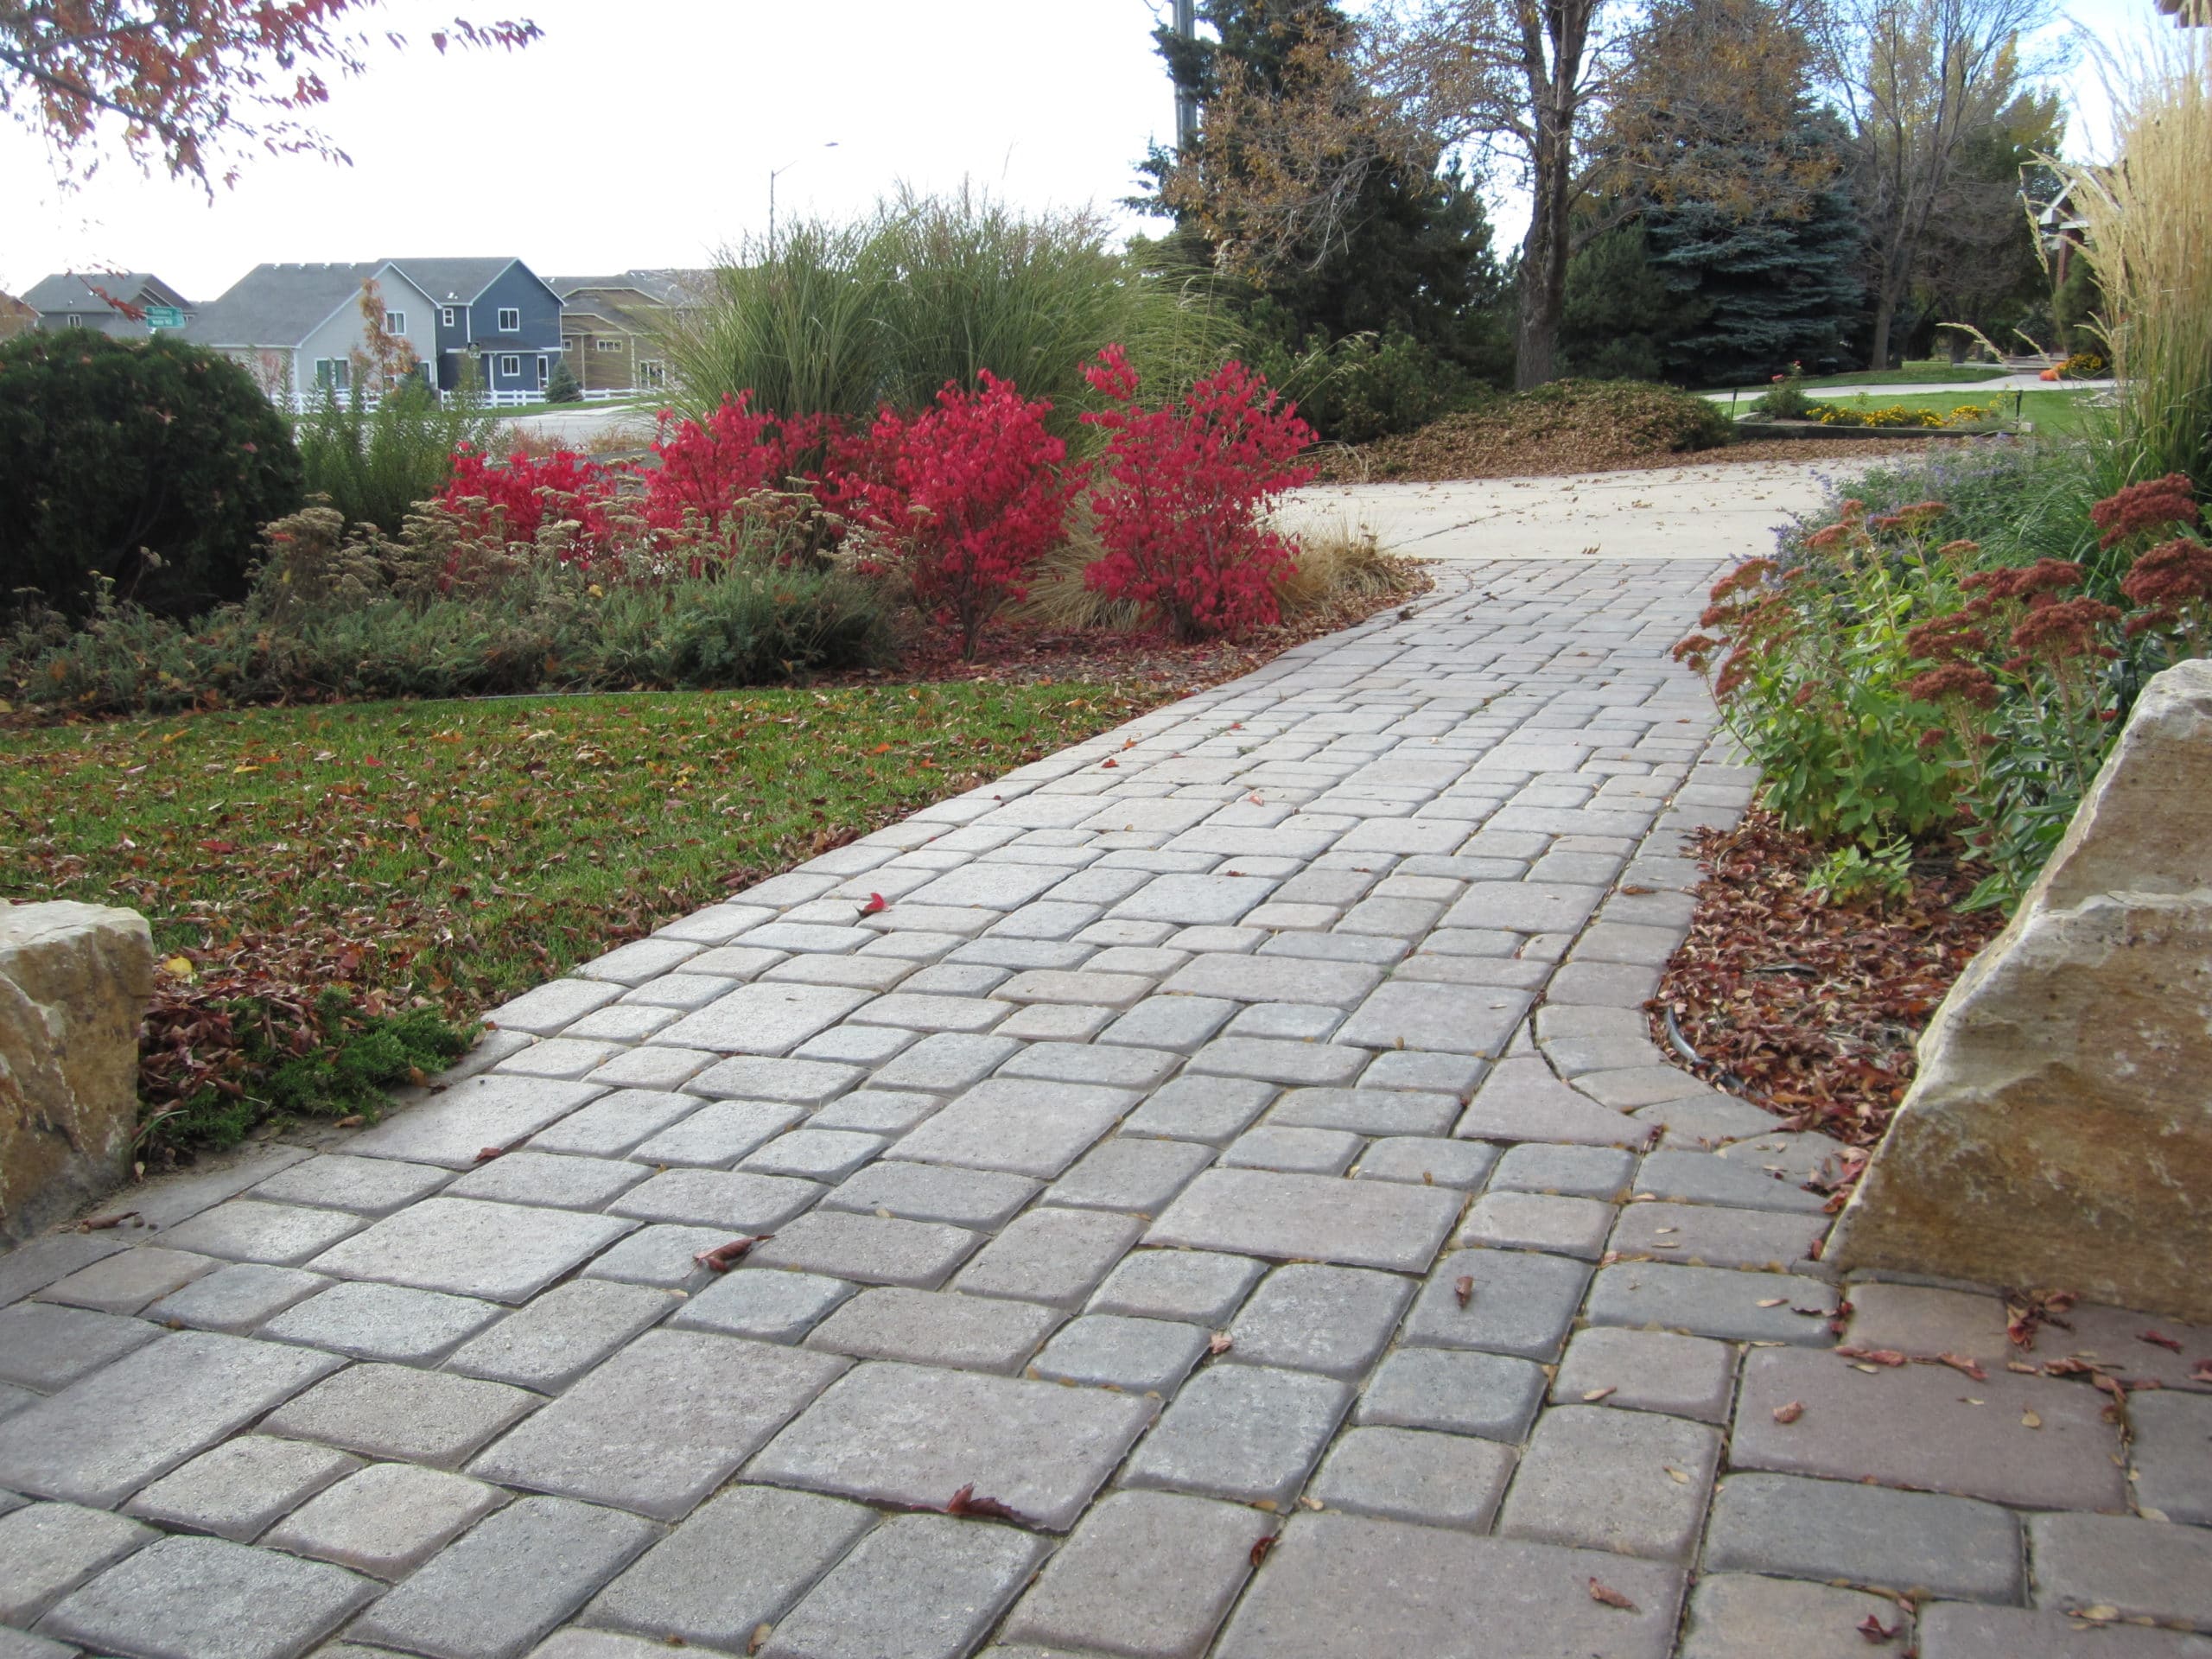 Brick laid path from driveway bordered by grass and mulch with plants and bushes.